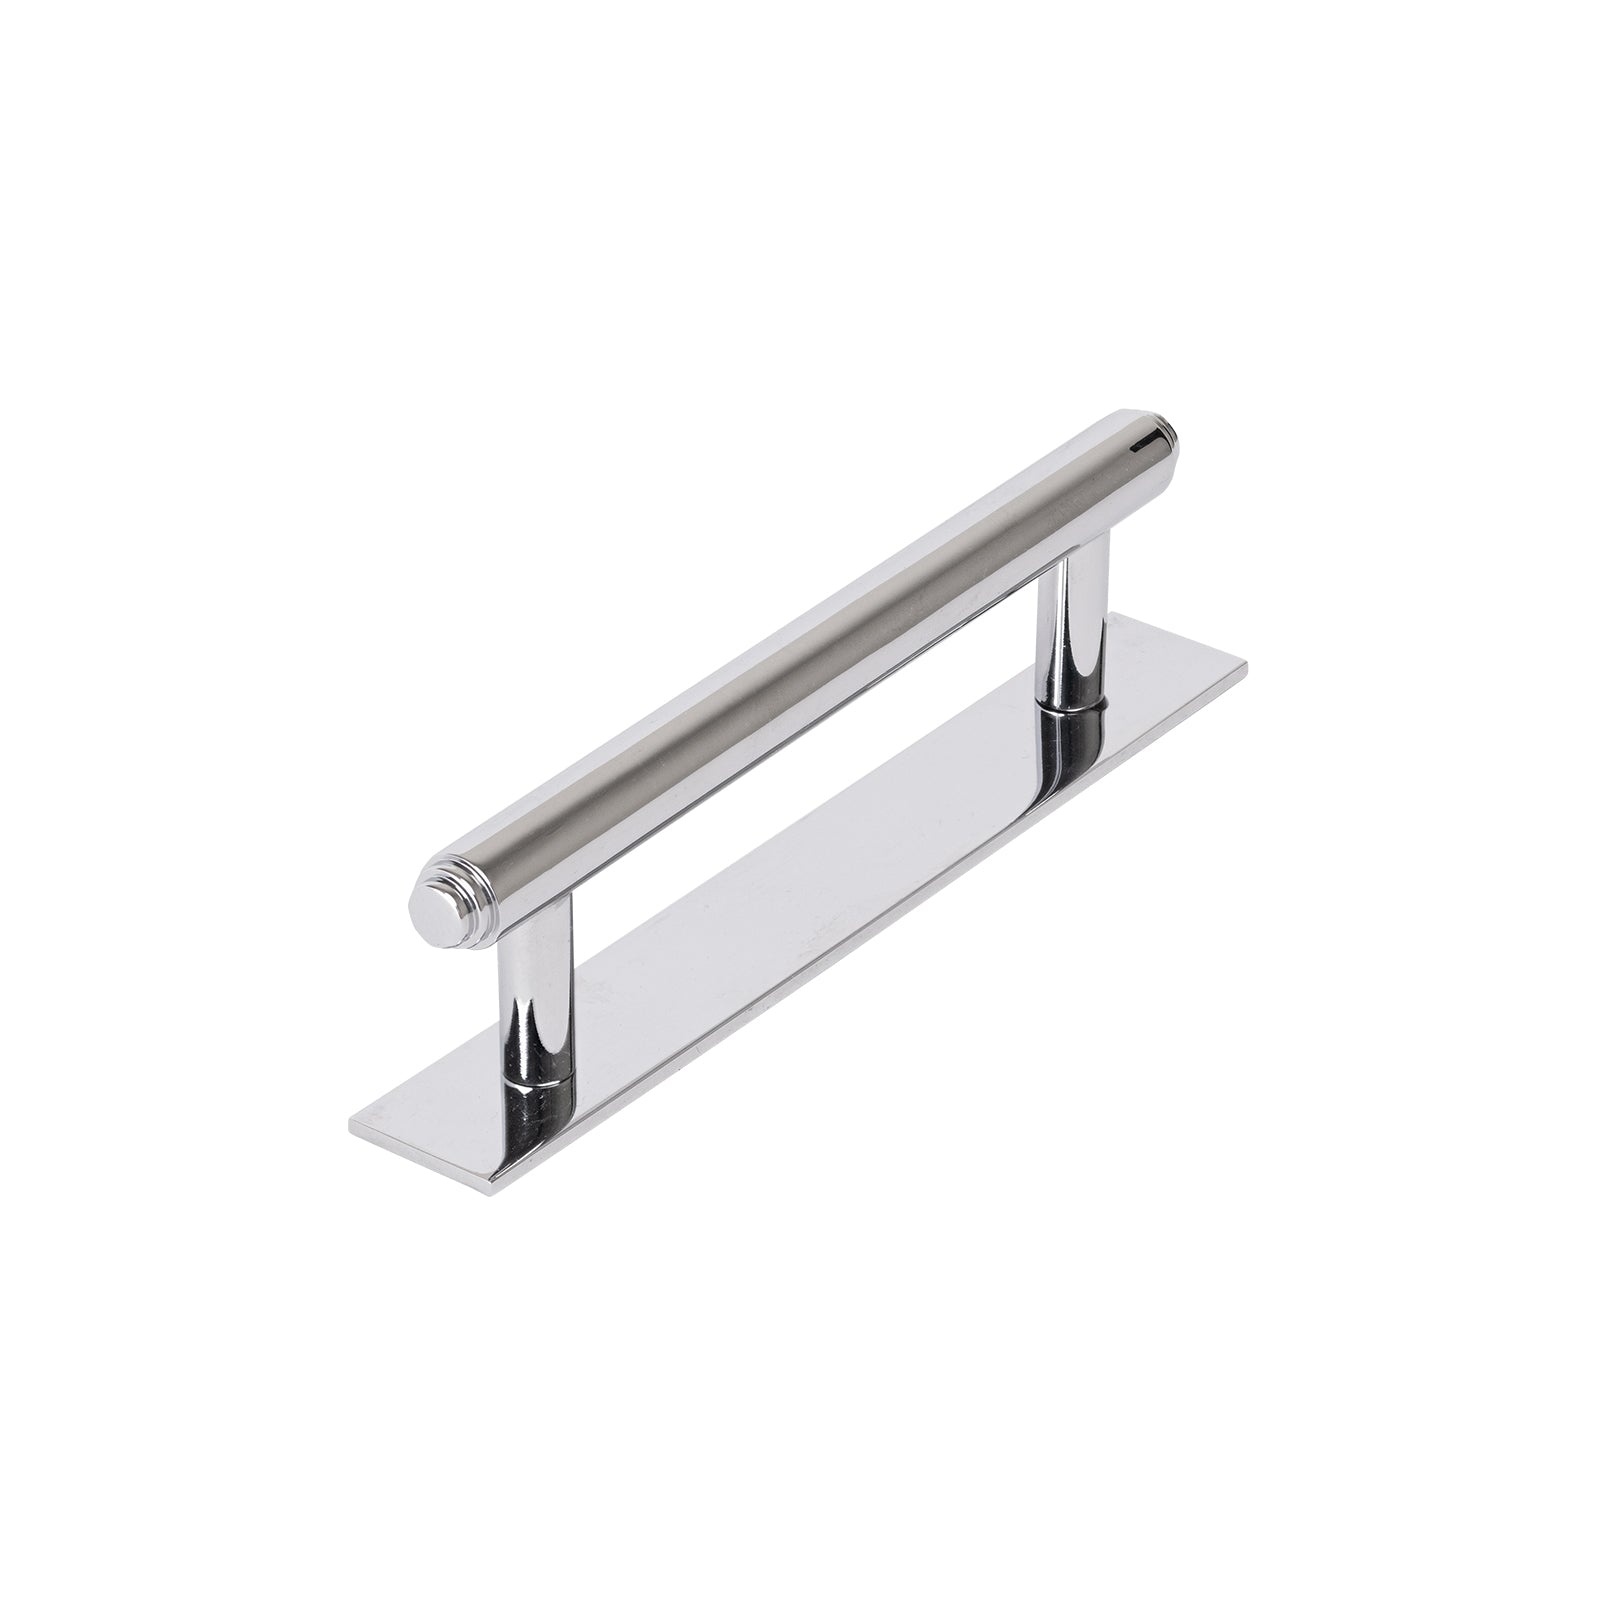 chrome step pull handles on backplate, kitchen cupboard handles SHOW